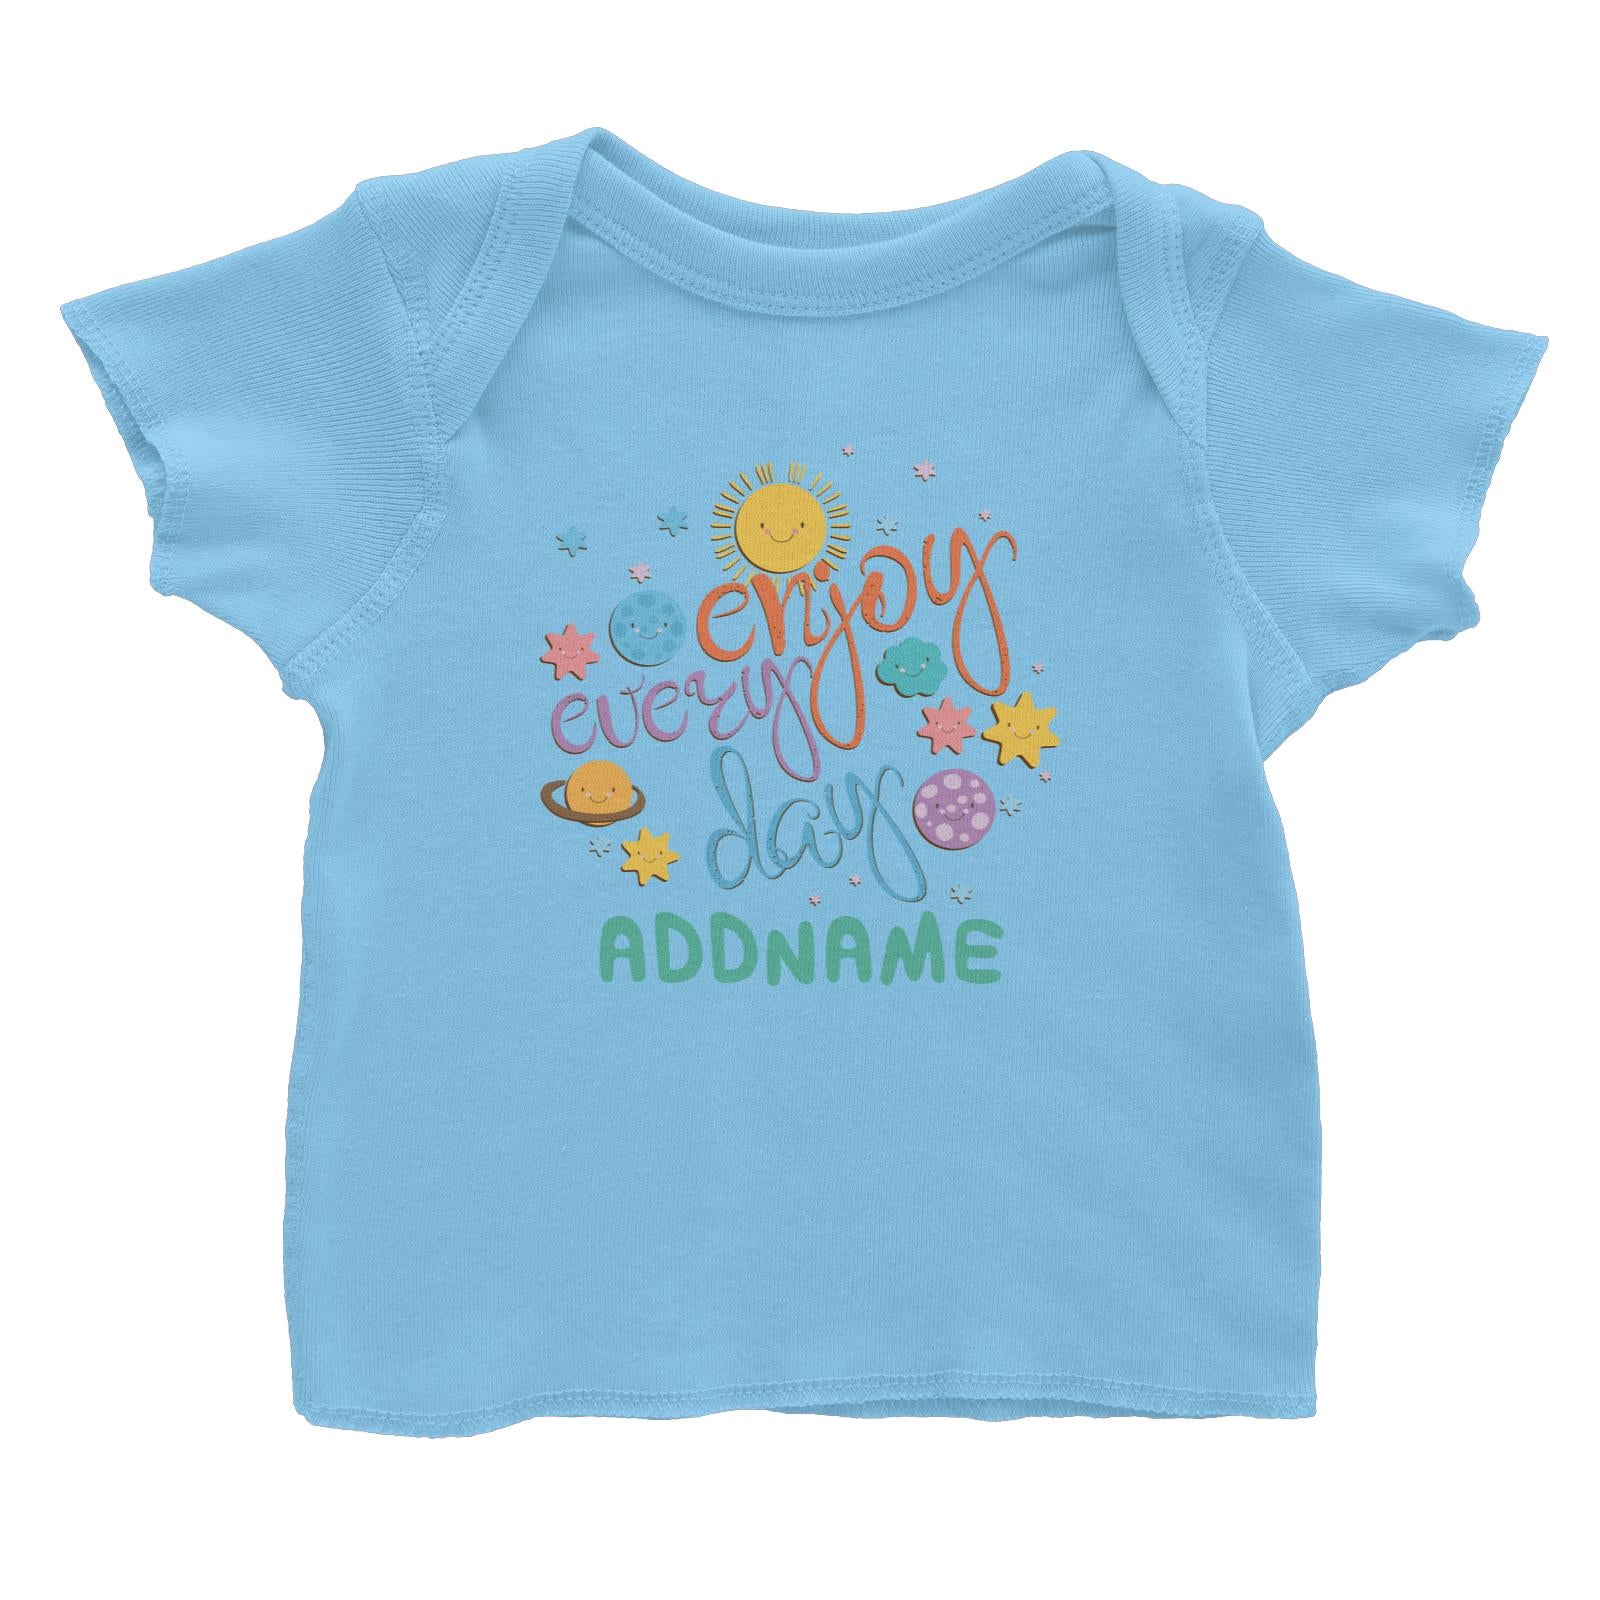 Children's Day Gift Series Enjoy Every Day Space Addname Baby T-Shirt